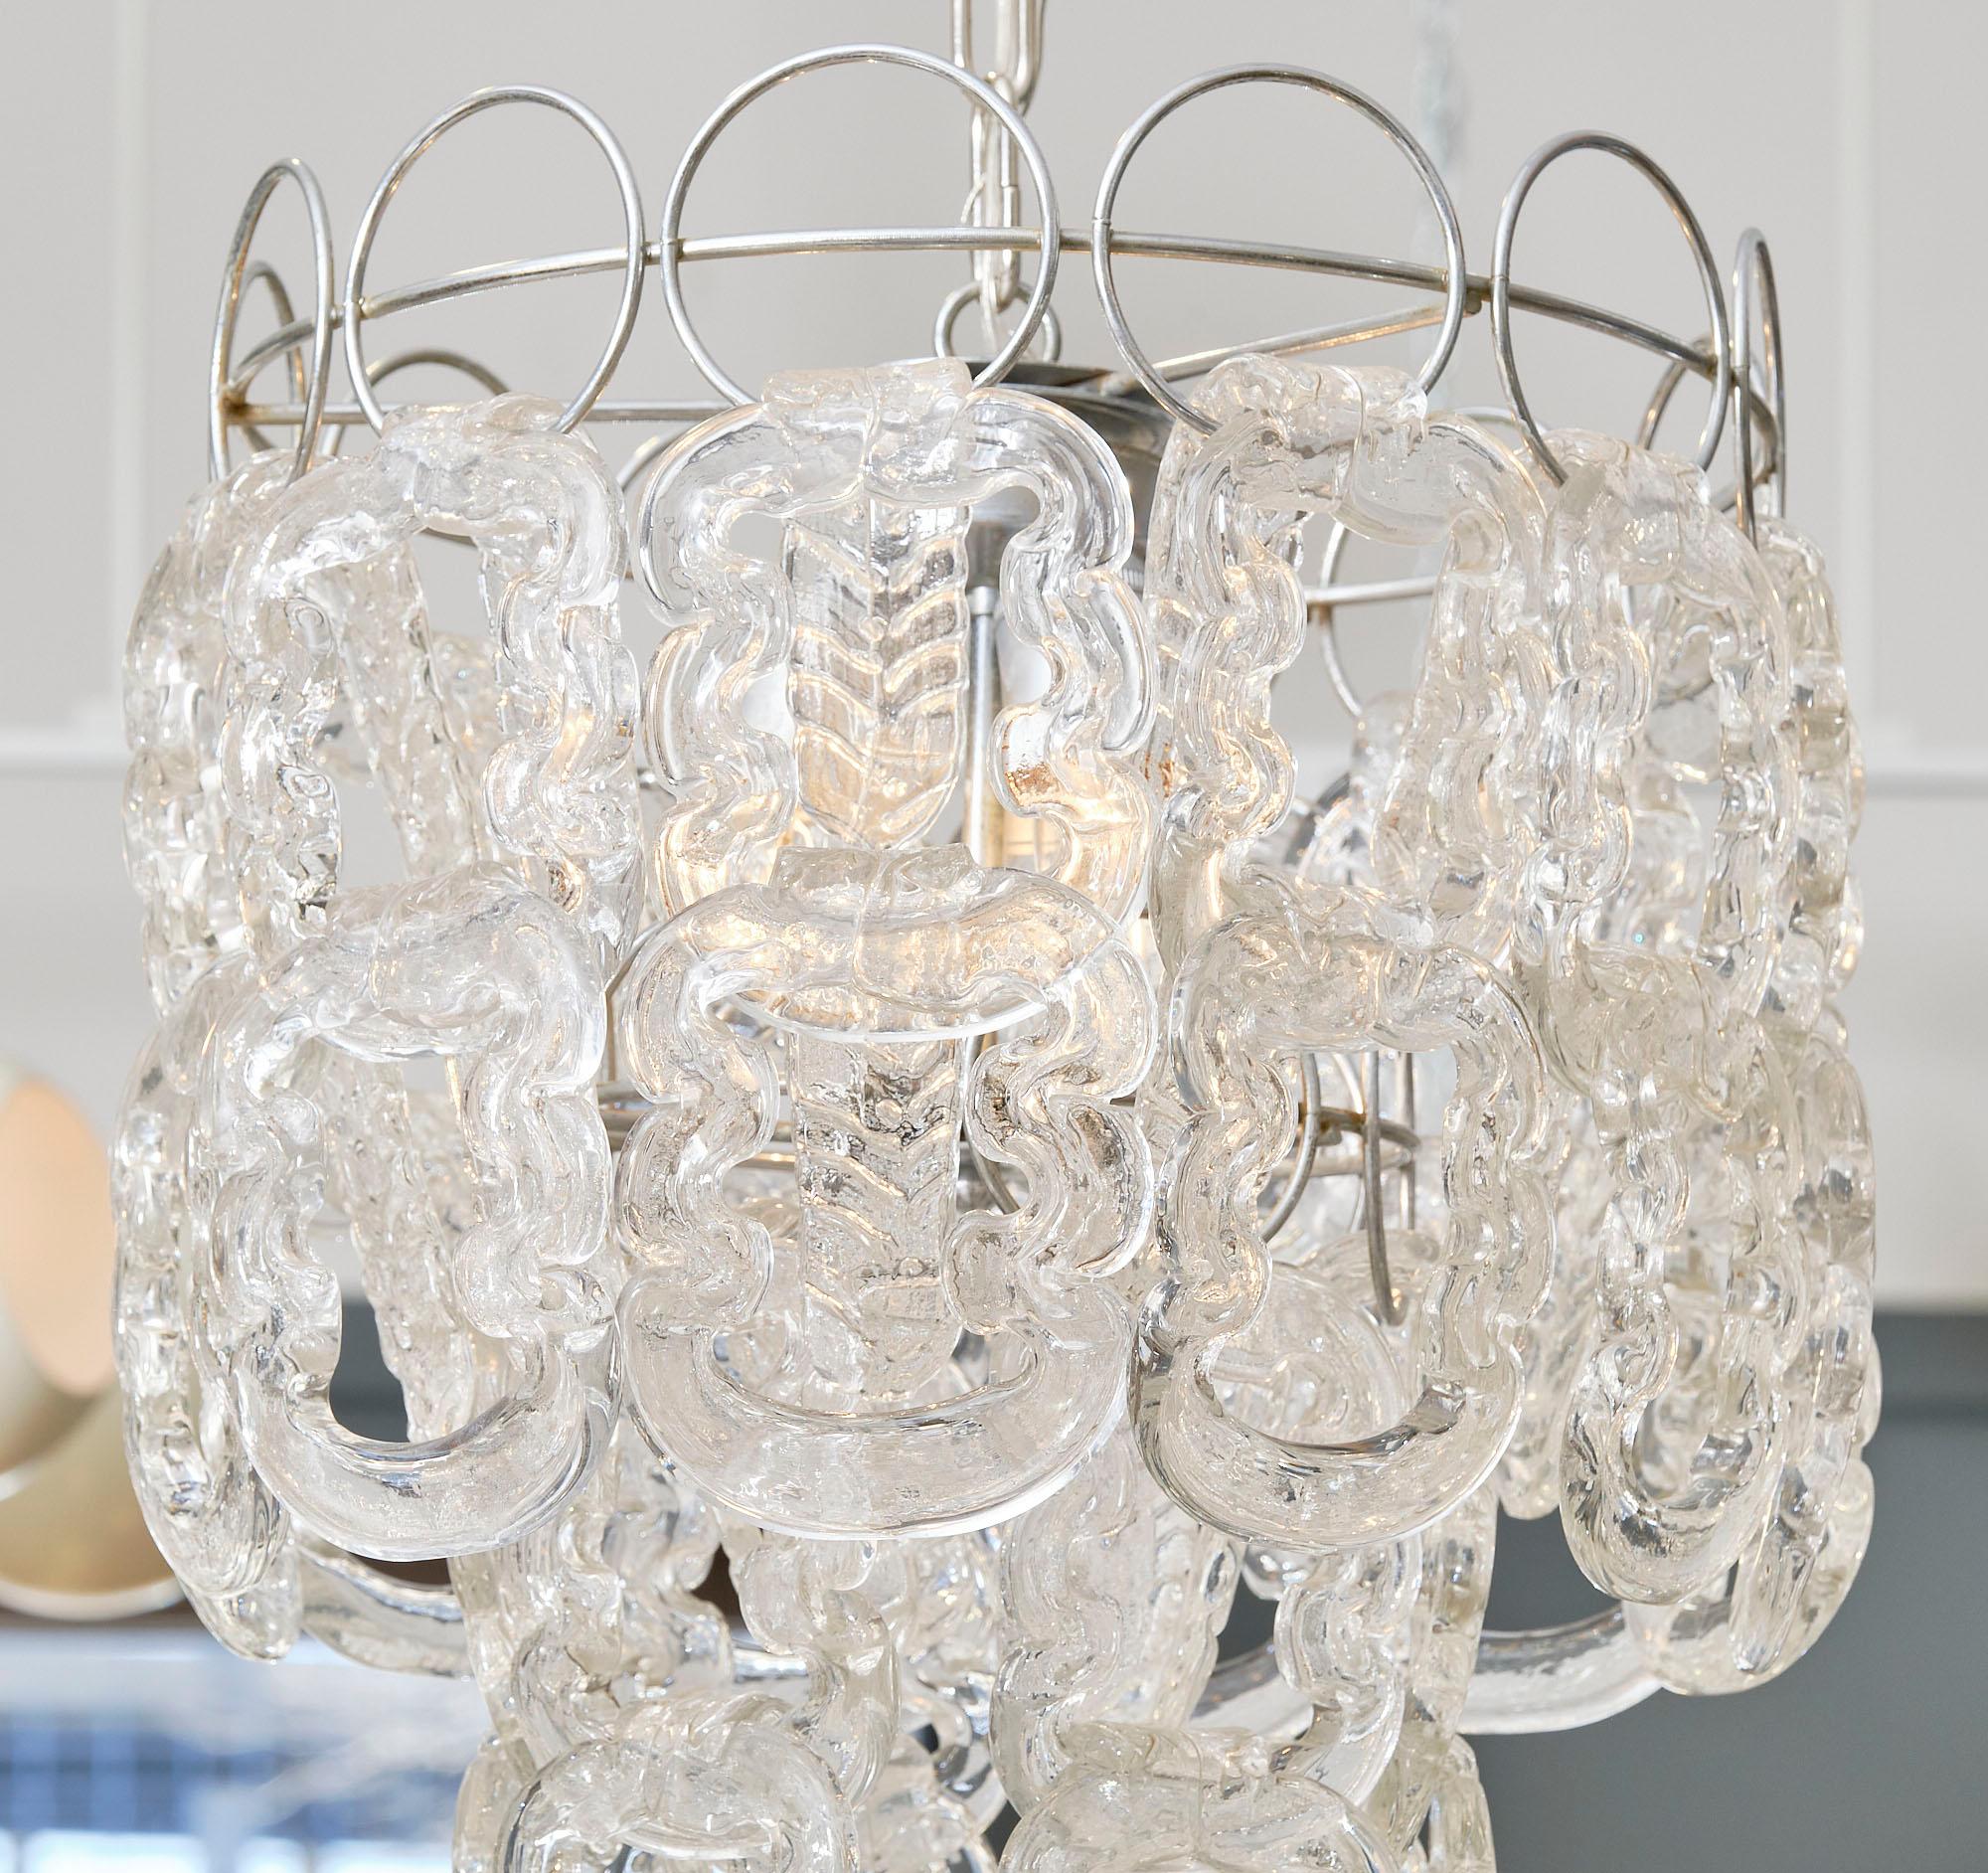 Late 20th Century Murano Glass “Ganci” Chandelier For Sale